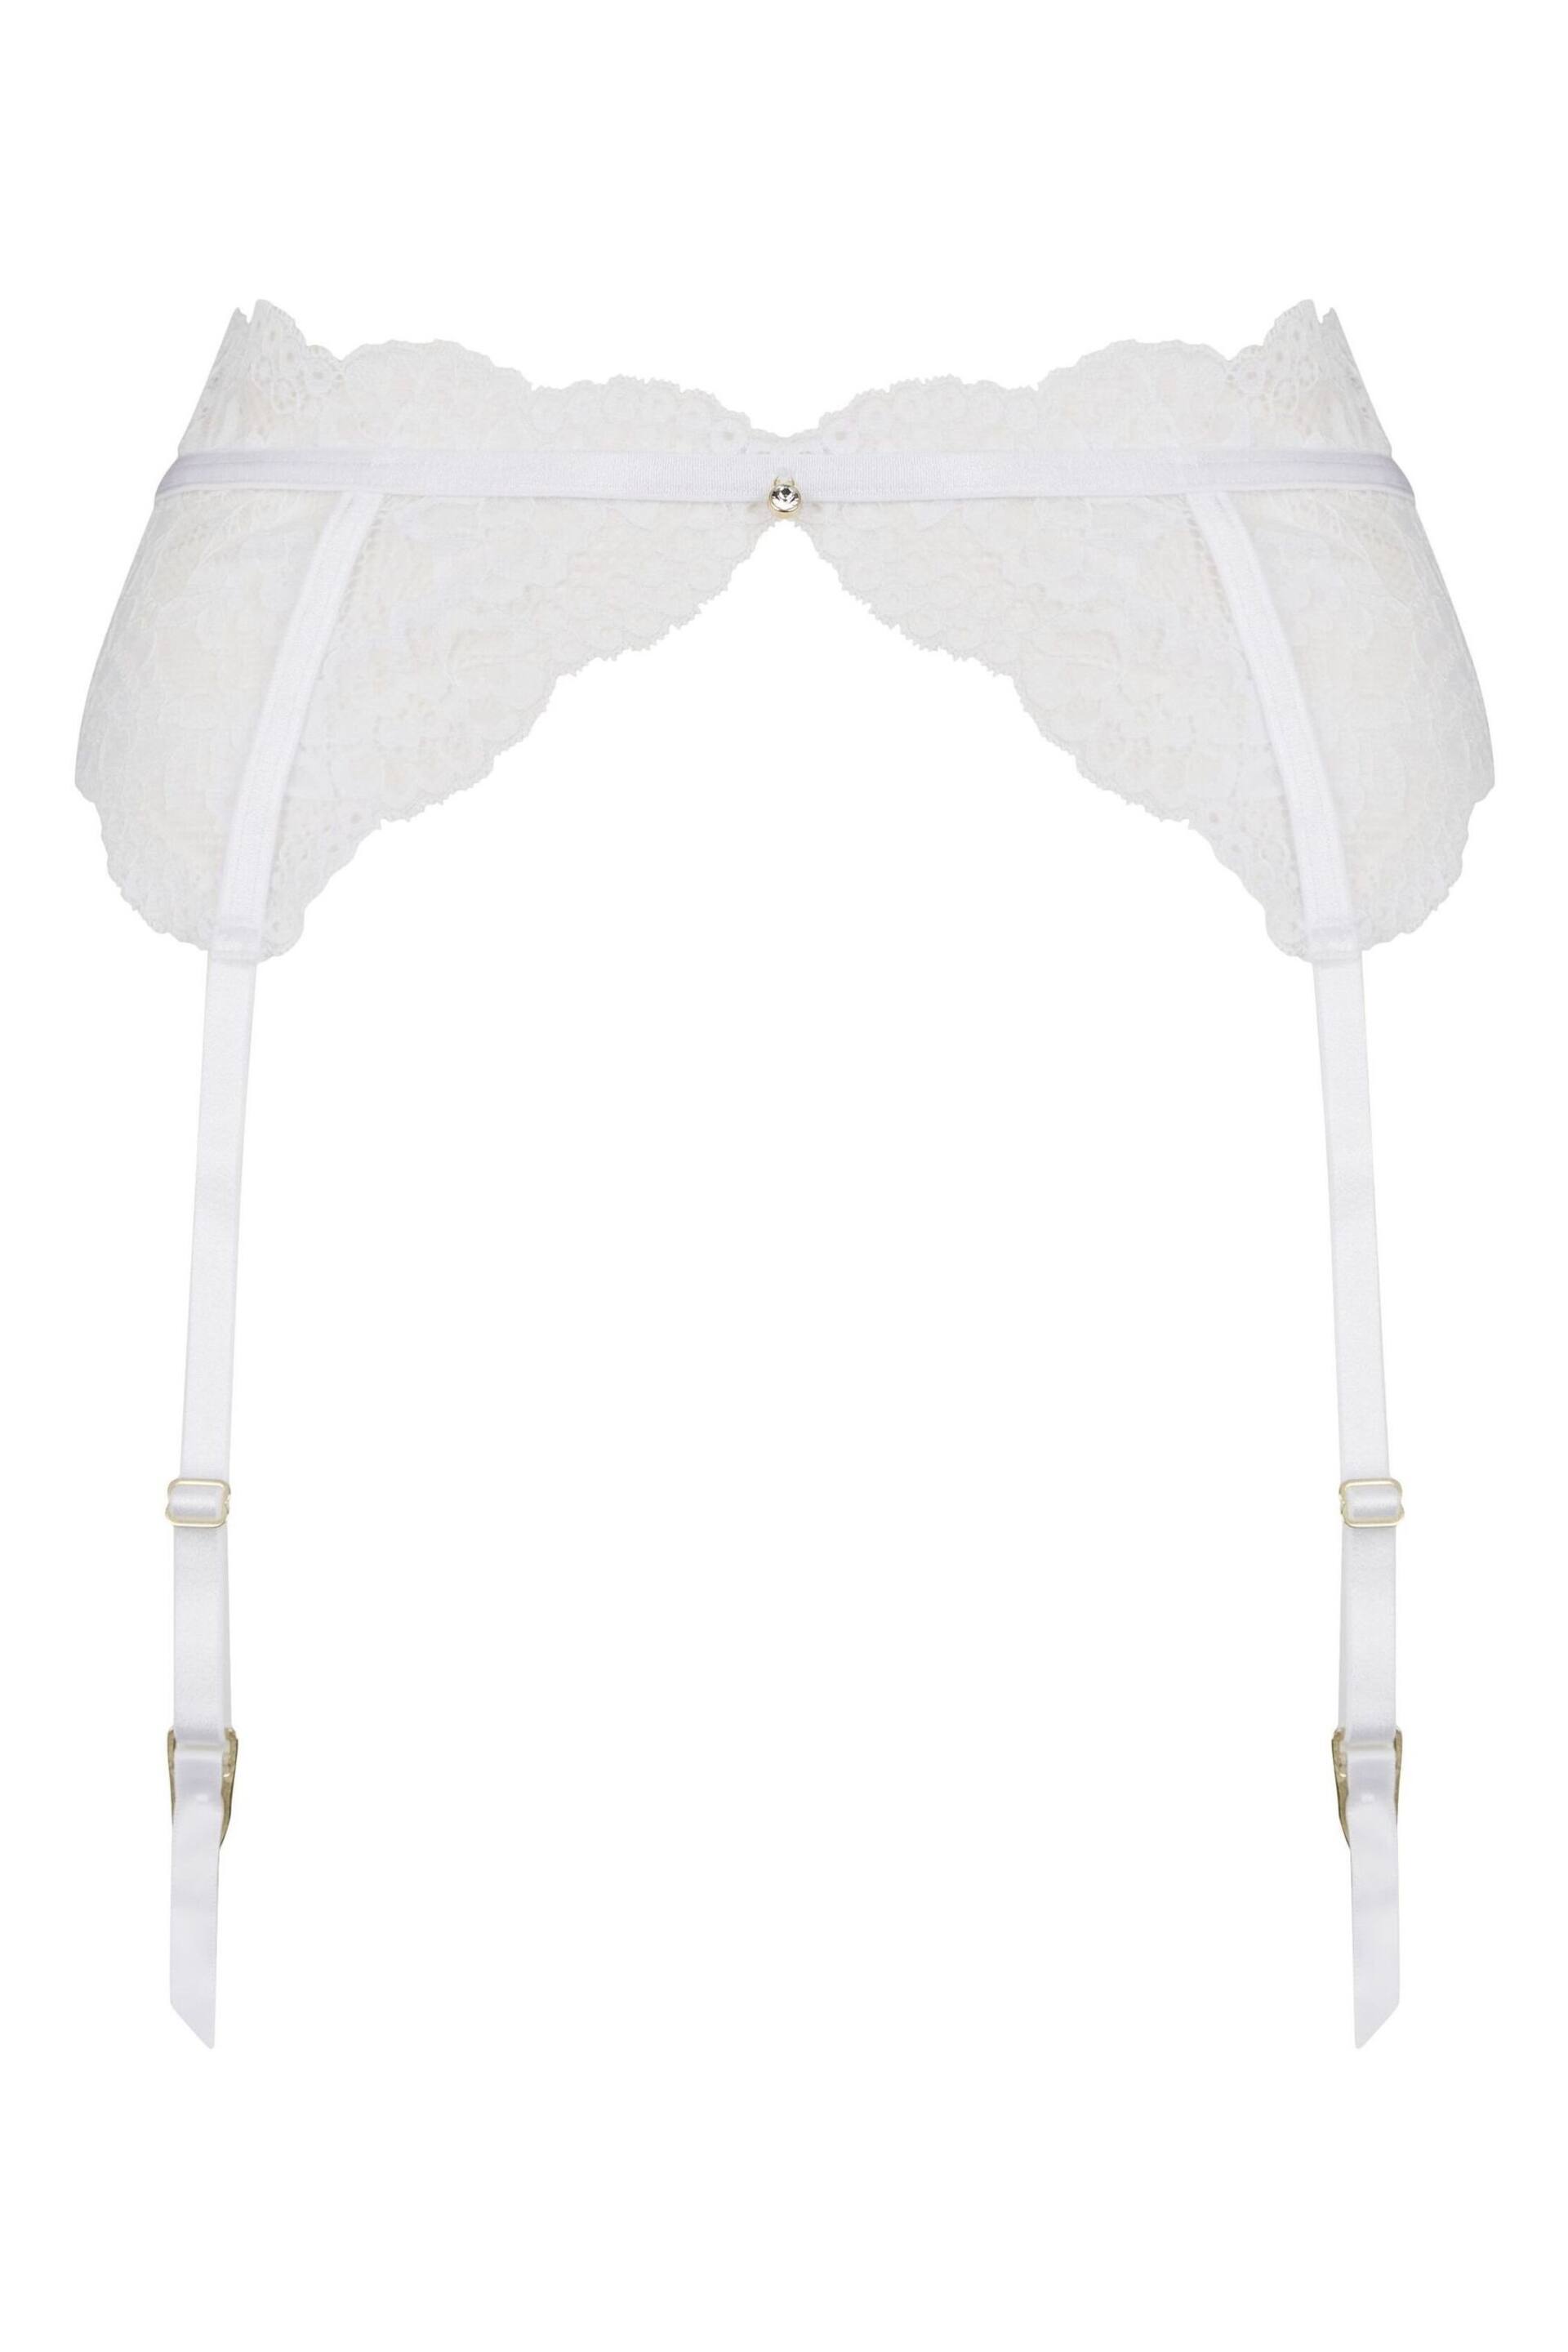 Ann Summers White Sexy Lace Planet Suspender Belt - Image 6 of 6